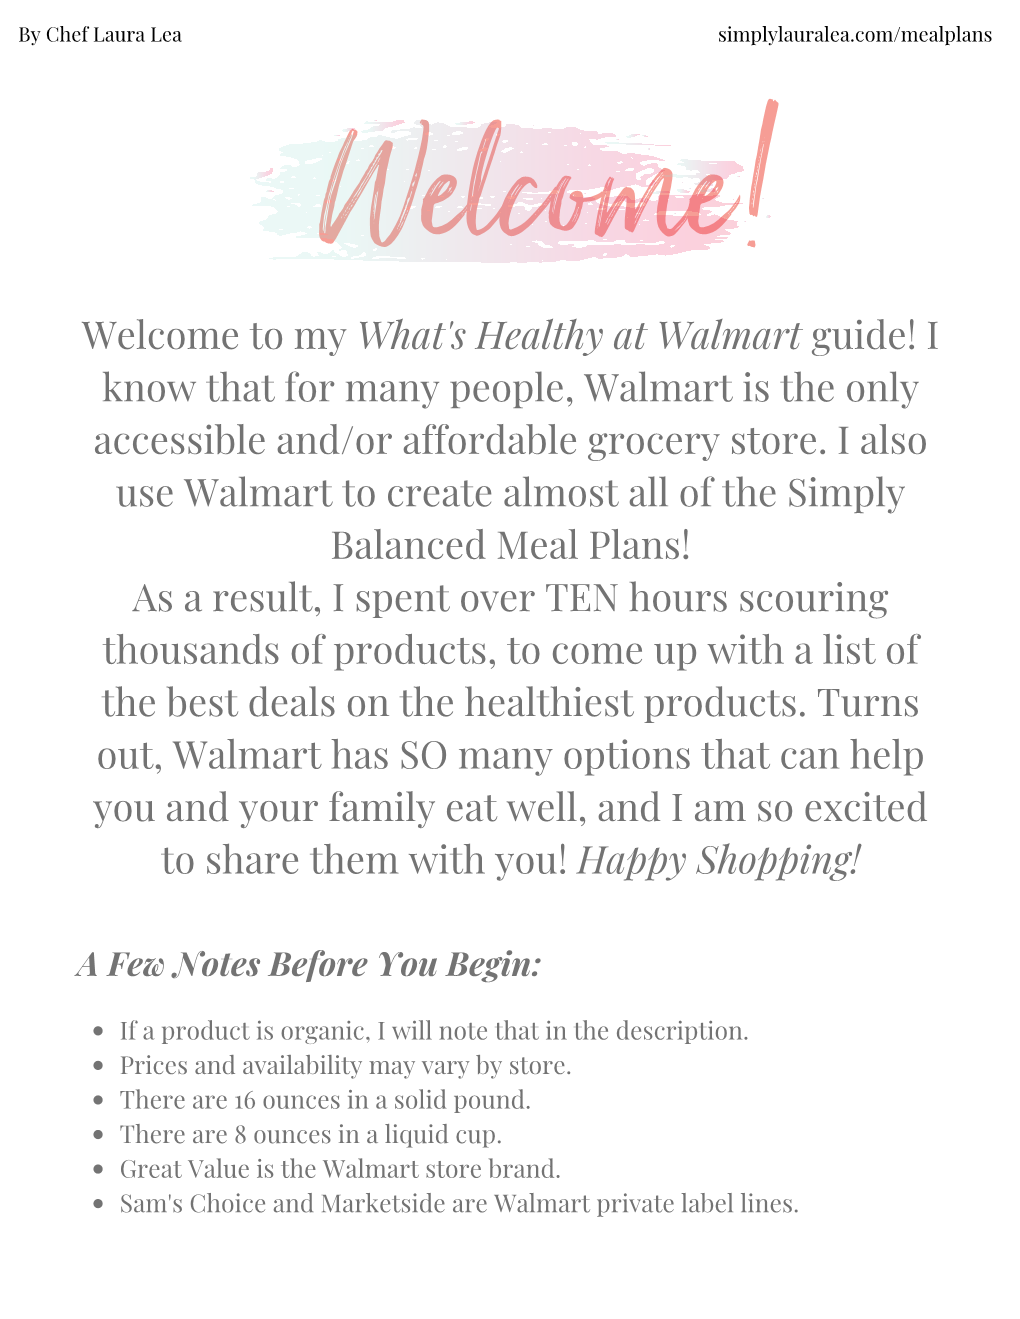 My What's Healthy at Walmart Guide! I Know That for Many People, Walmart Is the Only Accessible And/Or Affordable Grocery Store